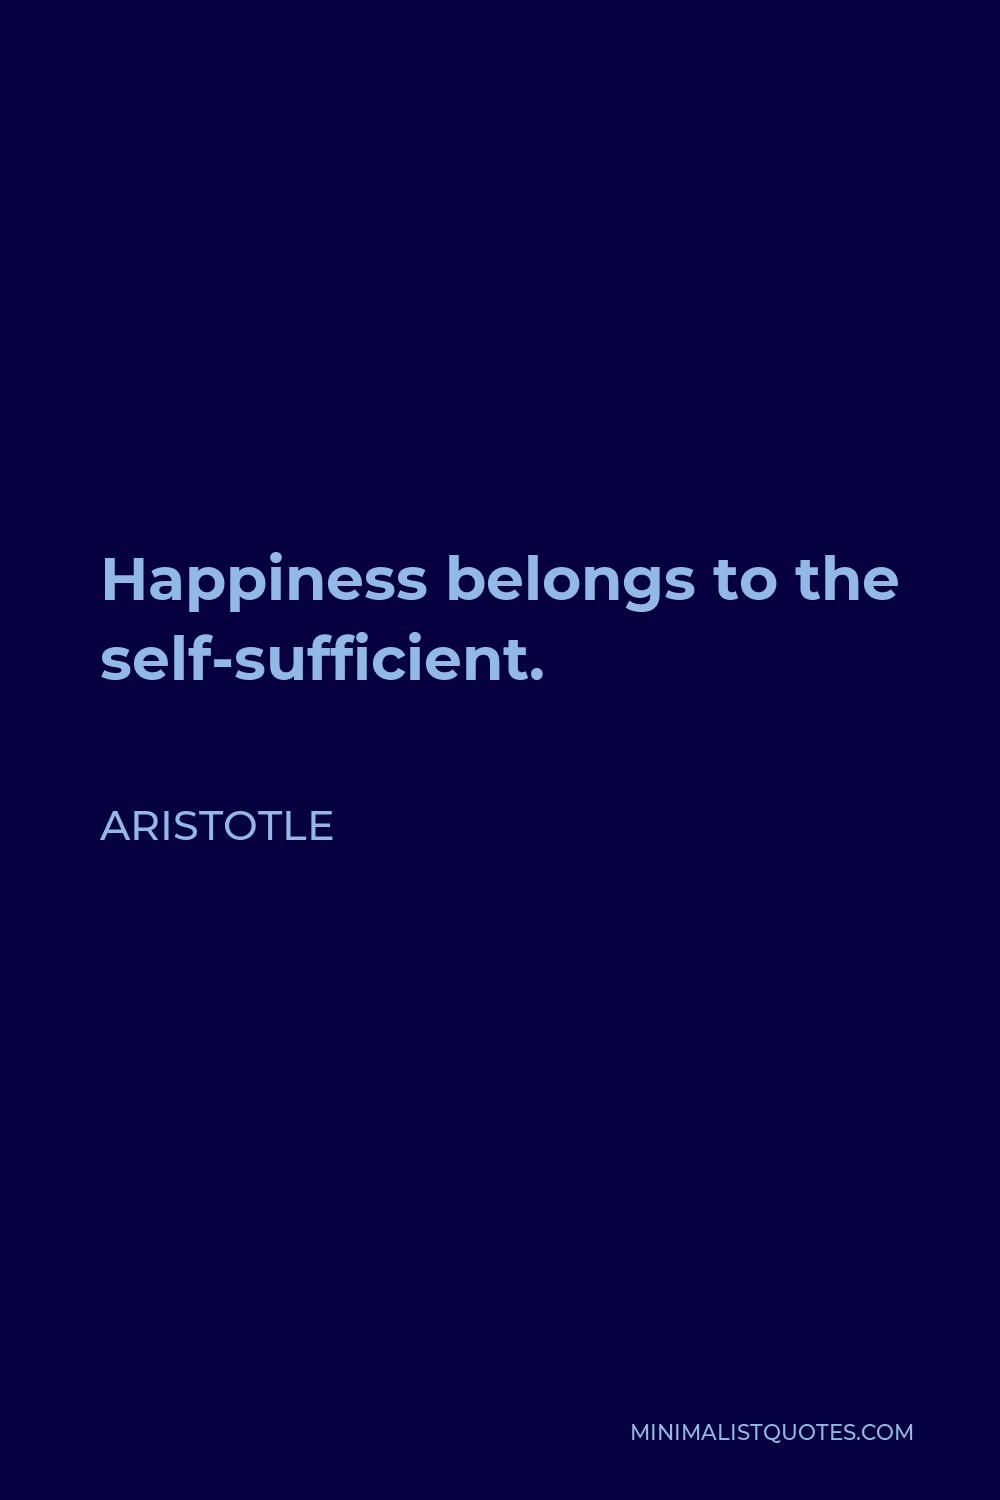 Aristotle Quote - Happiness belongs to the self-sufficient.